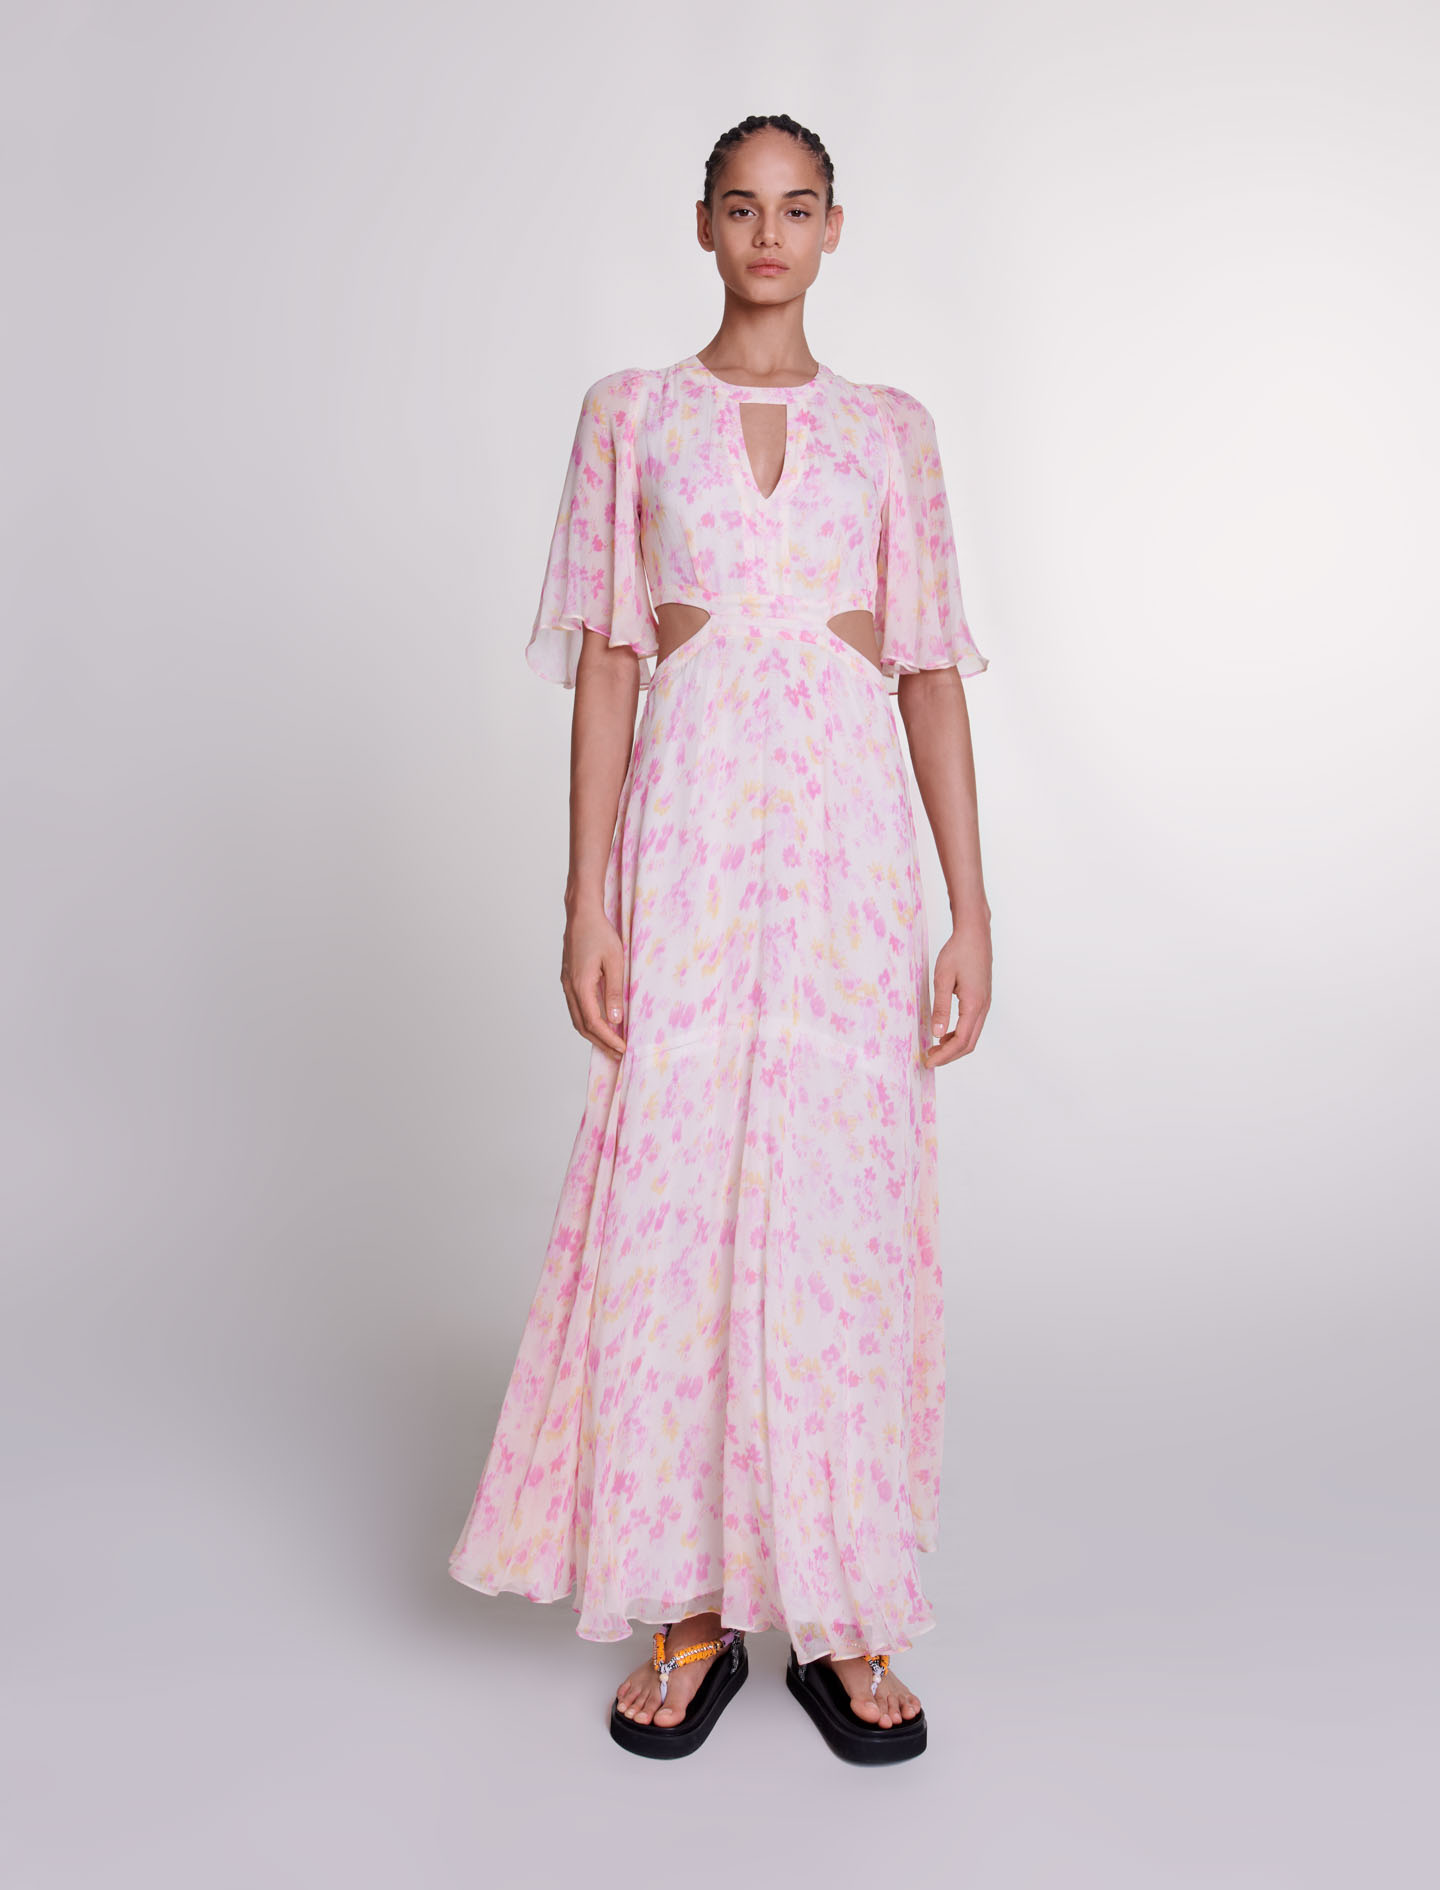 Maje Woman's viscose Lining: Floral print maxi dress for Spring/Summer, in color Pink Flower Print /